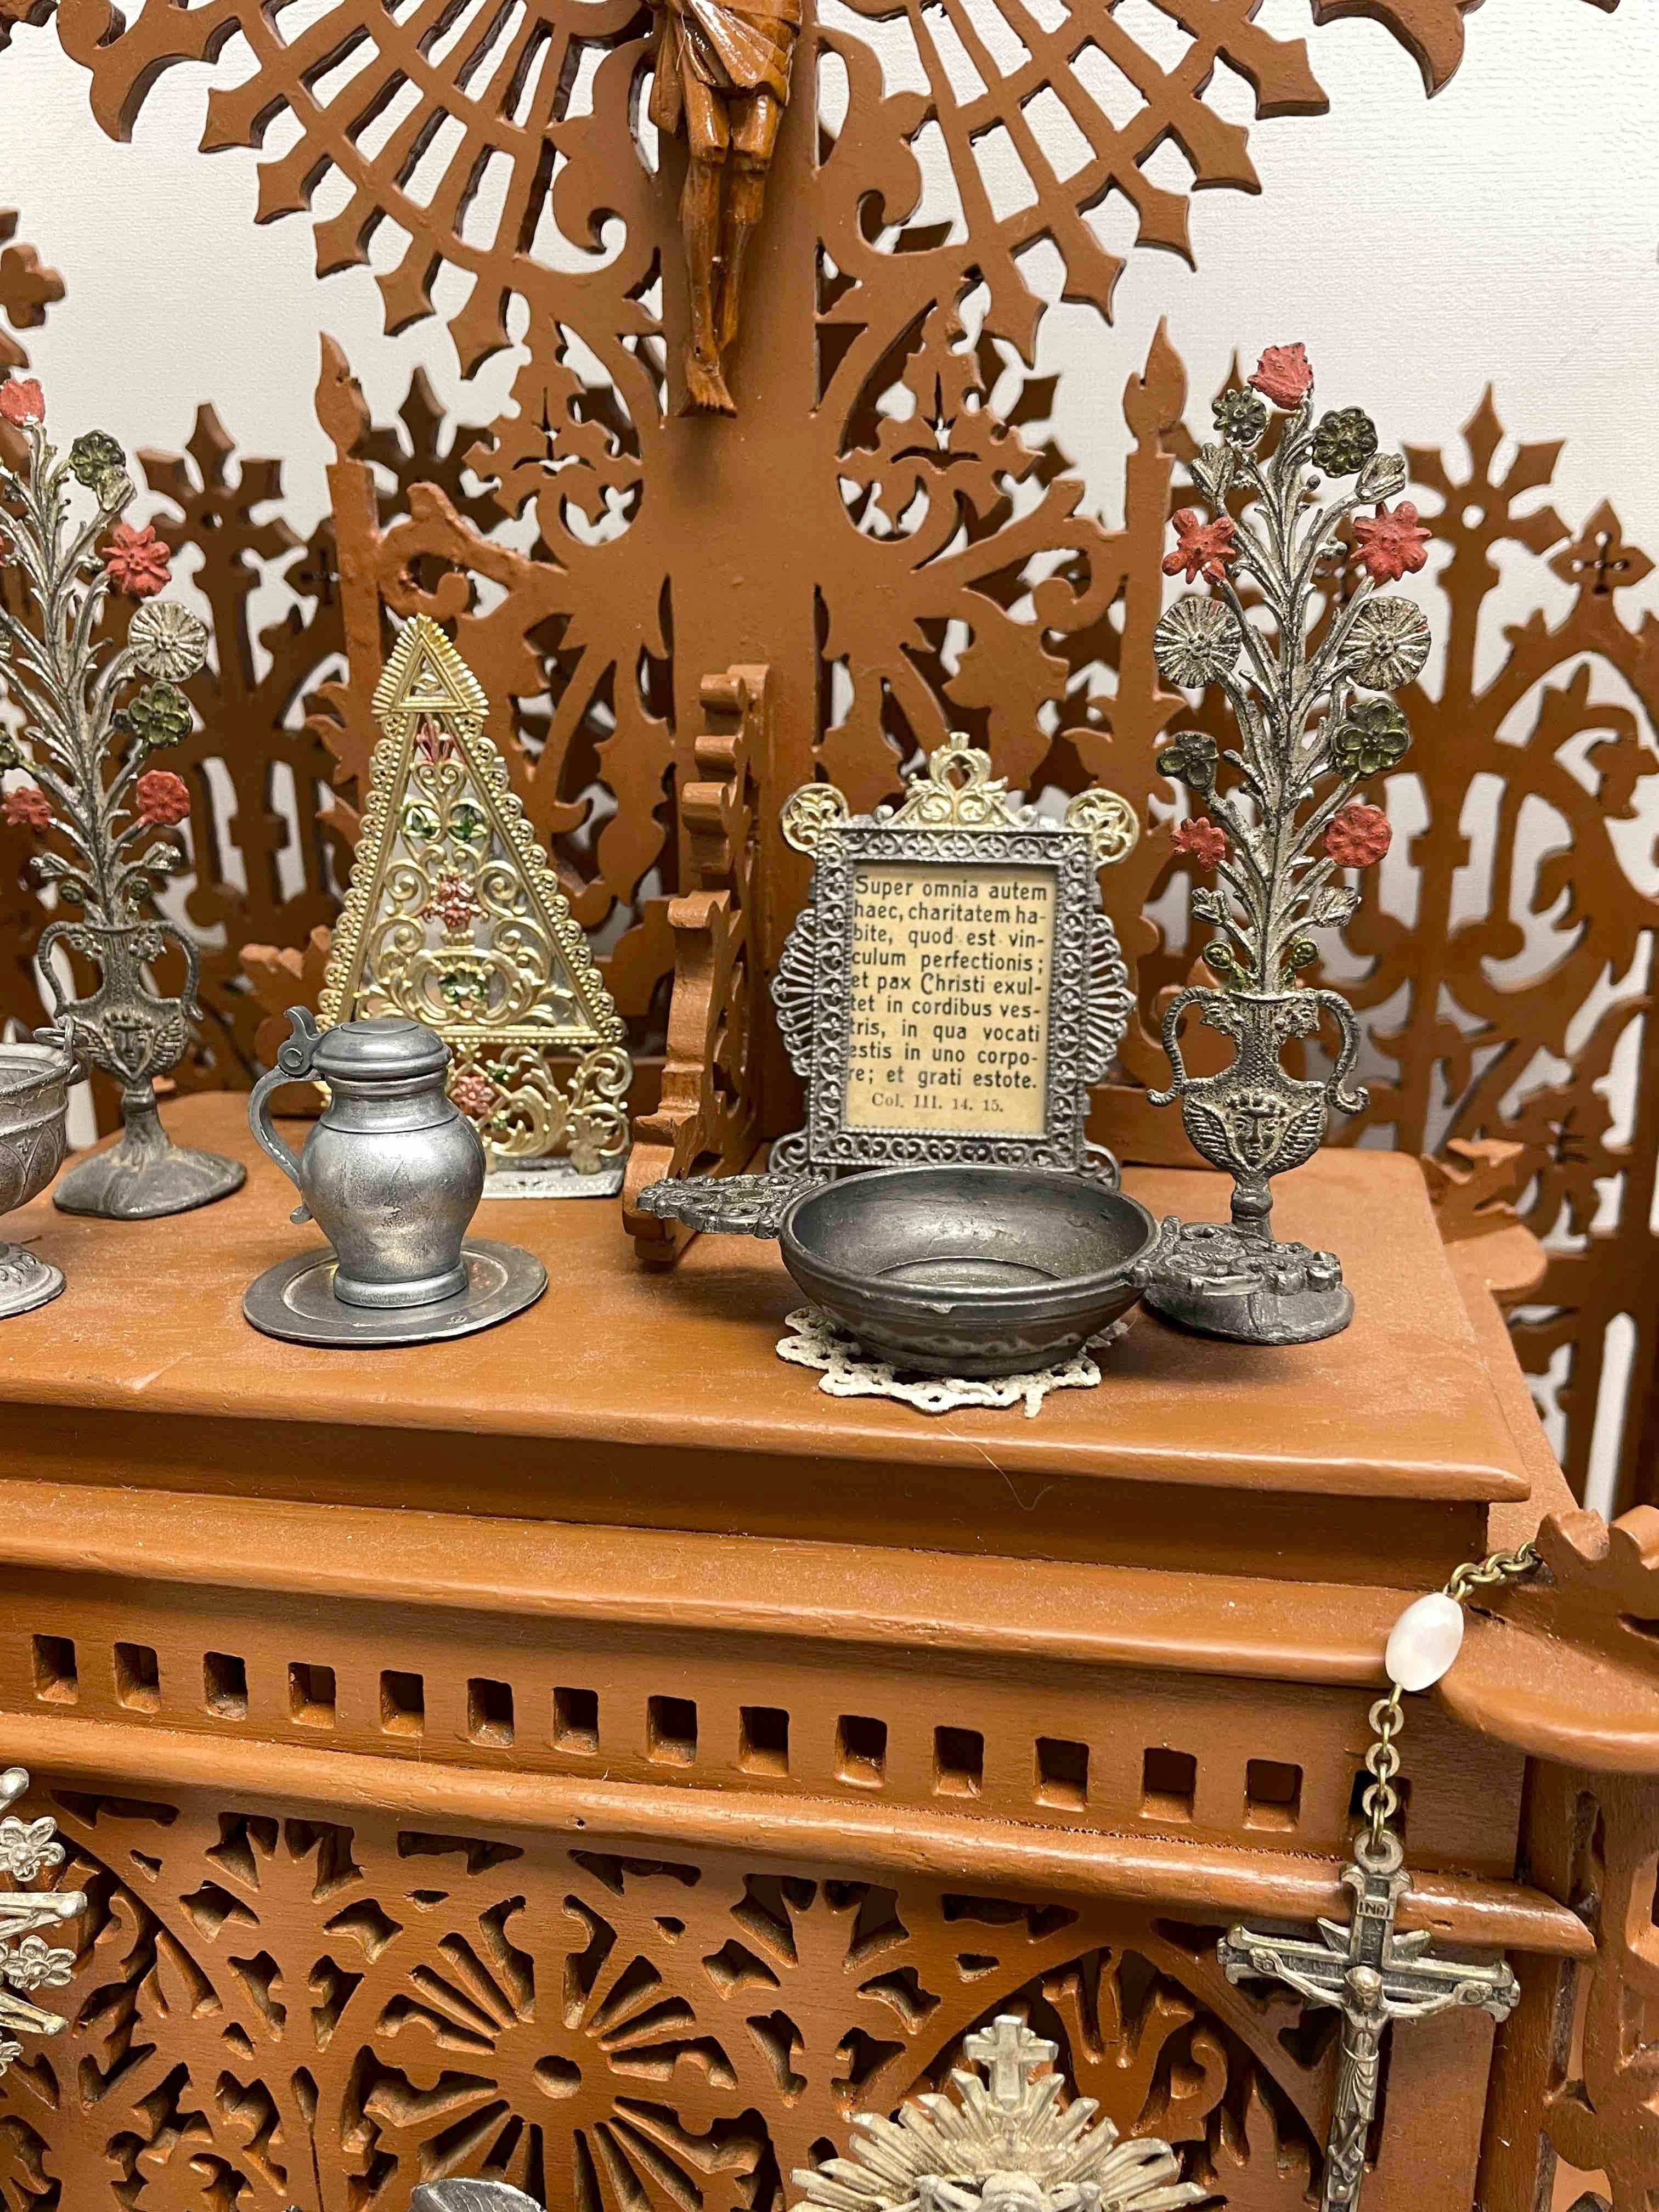 Wood Fretwork House Altar with Accessories Black Forest Folk Art 1900s For Sale 6